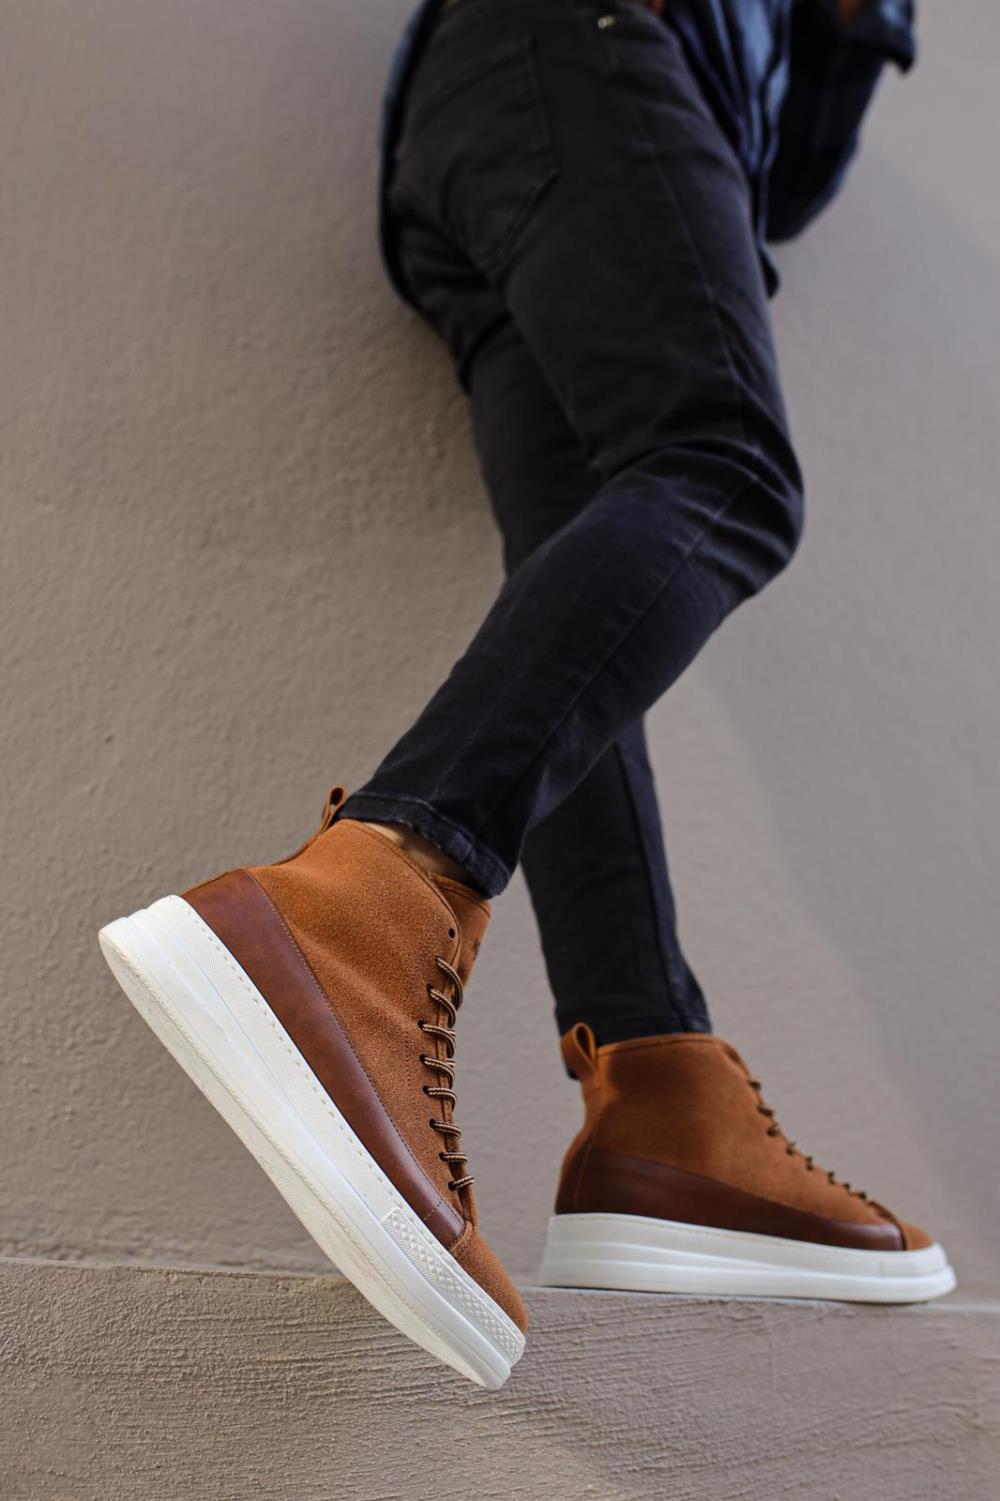 STM Boot Unisex High Sole Shoes C-030 Tan Suede - STREETMODE ™